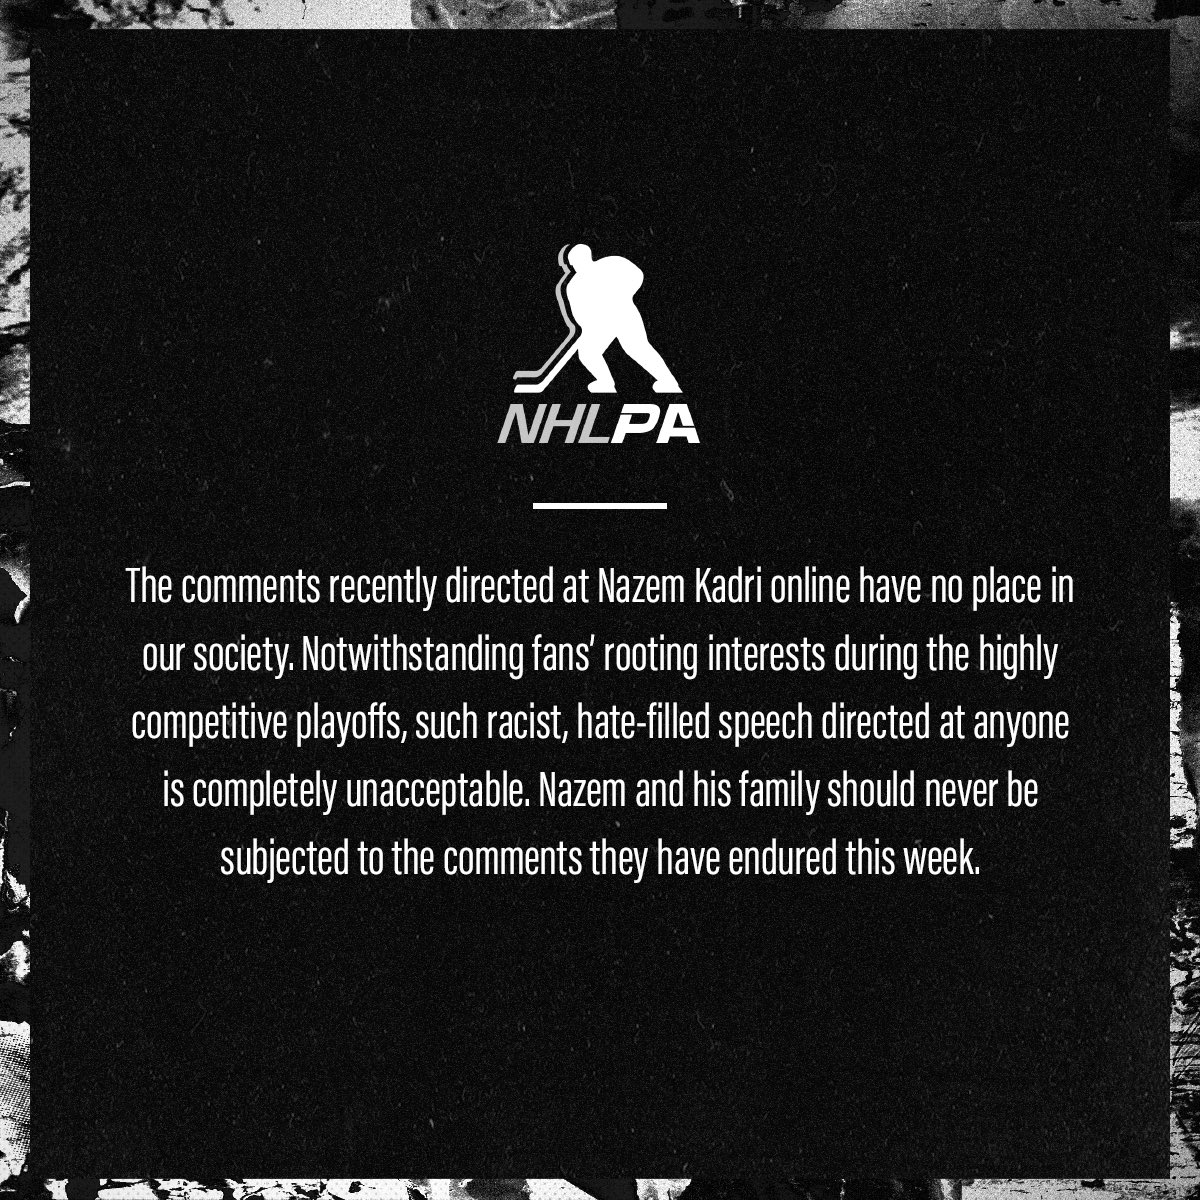 The NHLPA strongly condemns the hateful and offensive comments directed toward Nazem Kadri and his family.